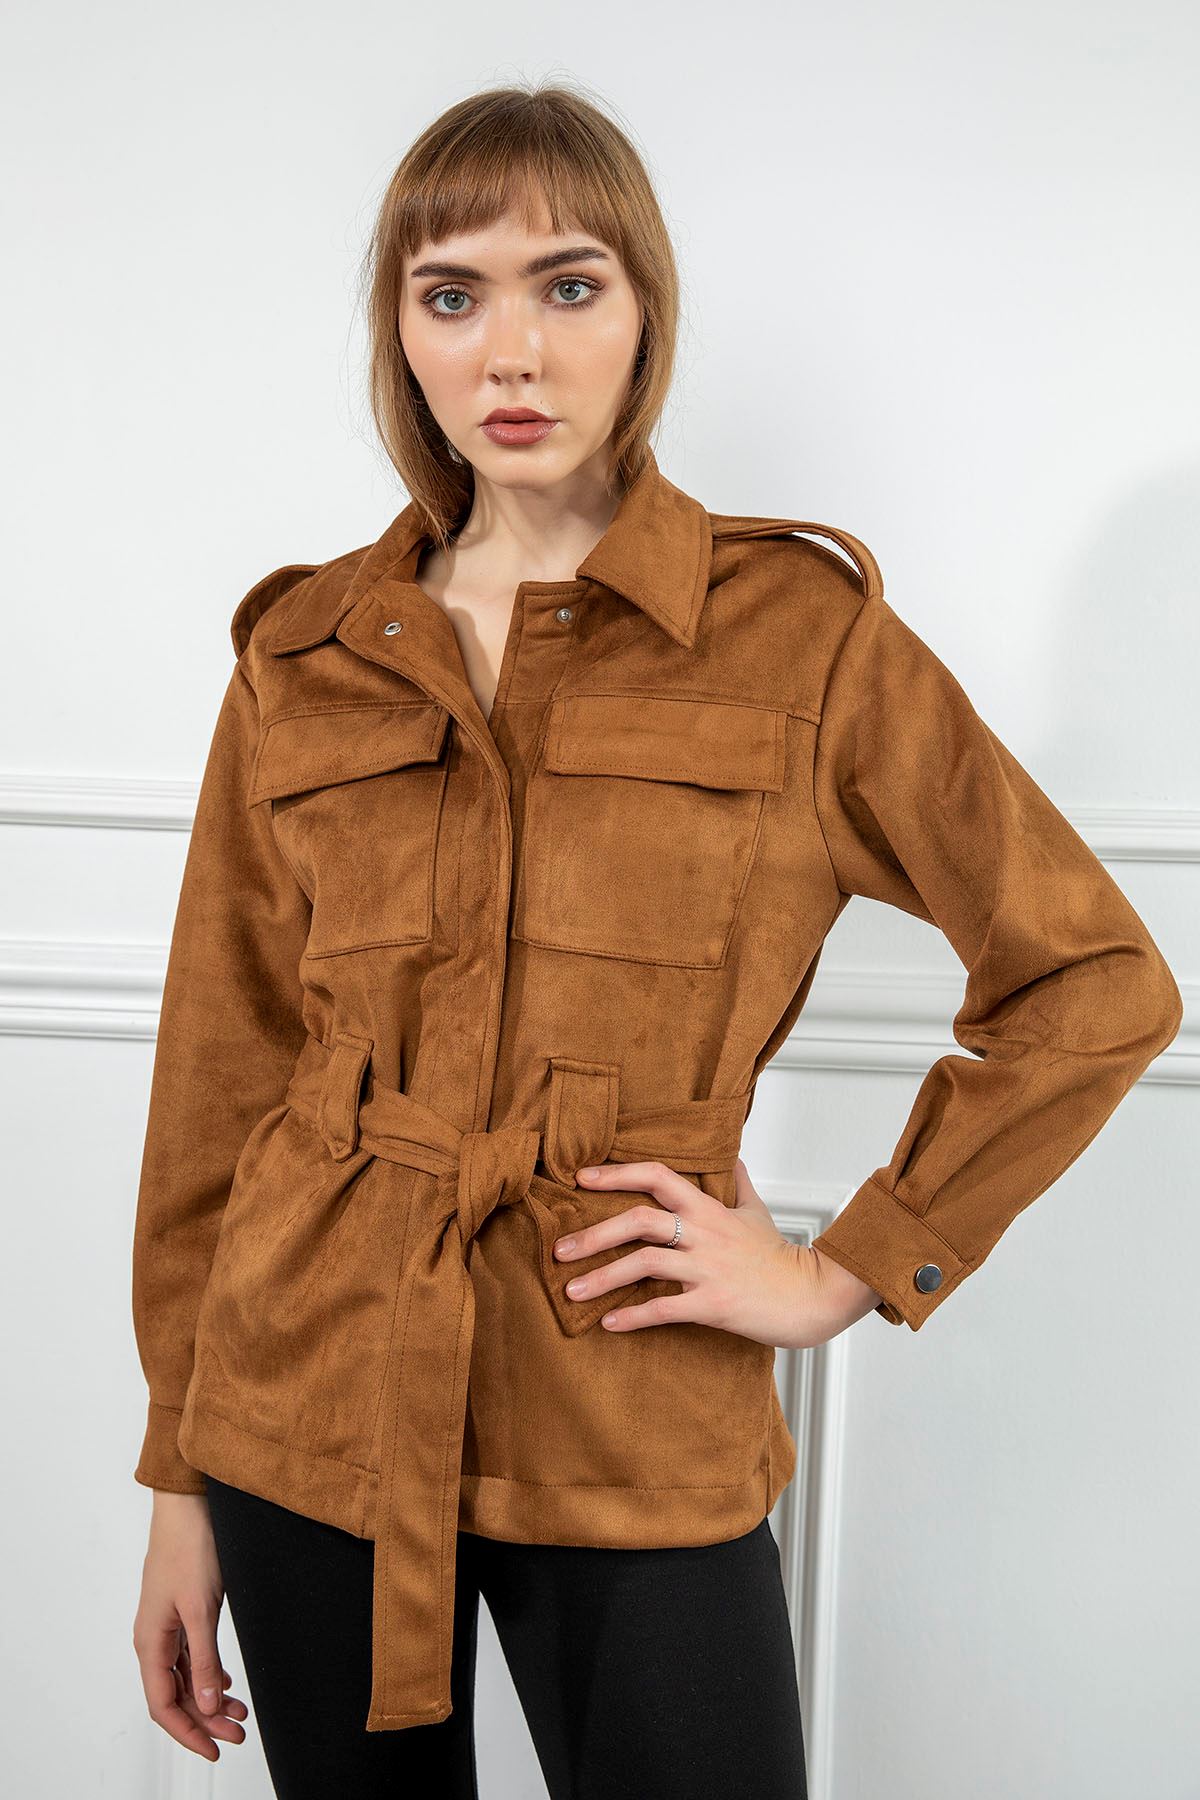 Suede Fabric Long Sleeve Shirt Collar Full Fit Belted Women Jacket - Light Brown